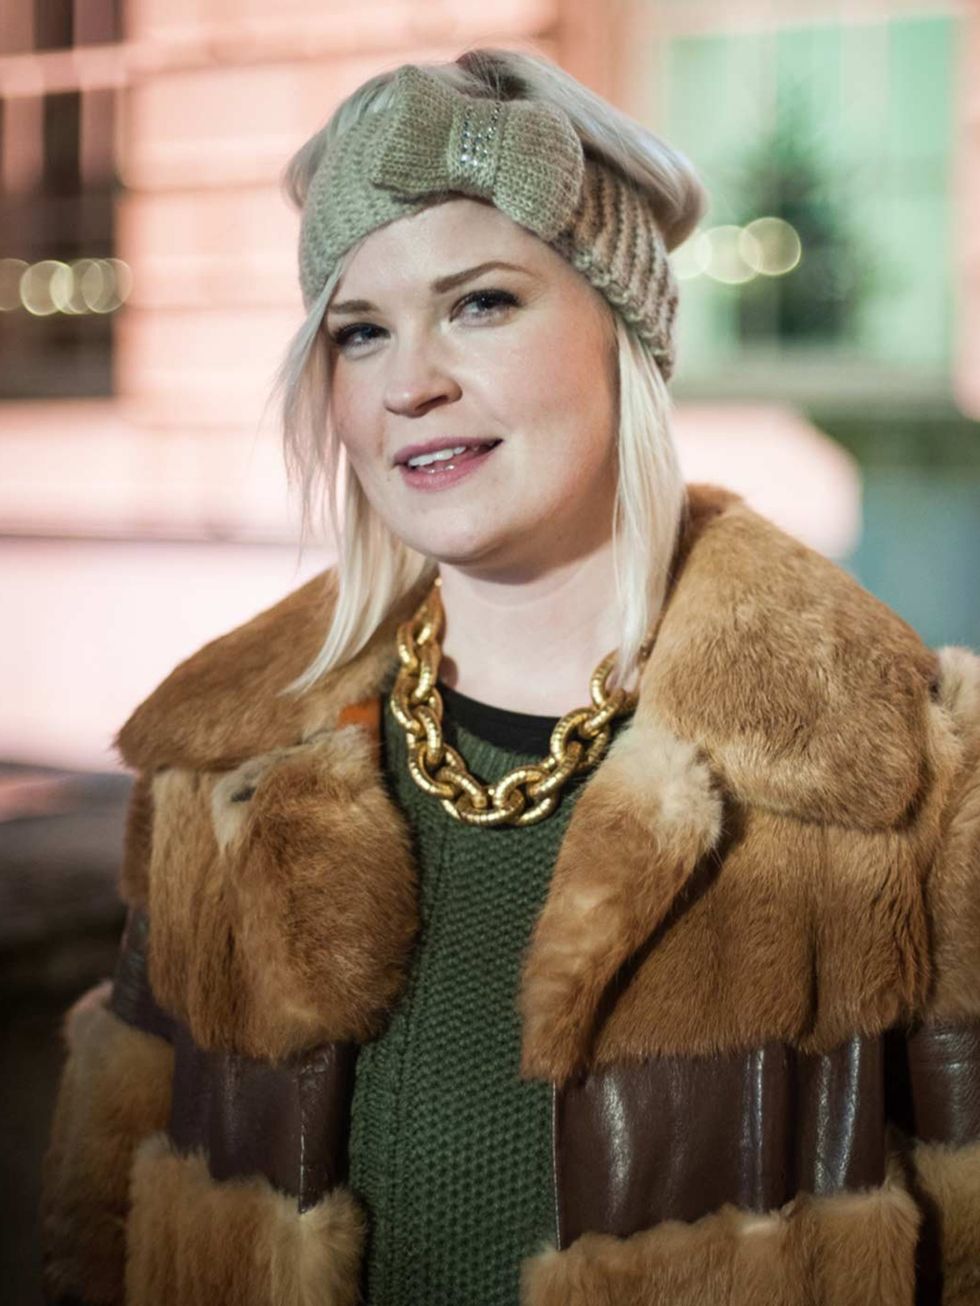 <p>Orlah.Vintage coat and necklace, Primark hat and top, Karen Millen jeans and boots.</p>